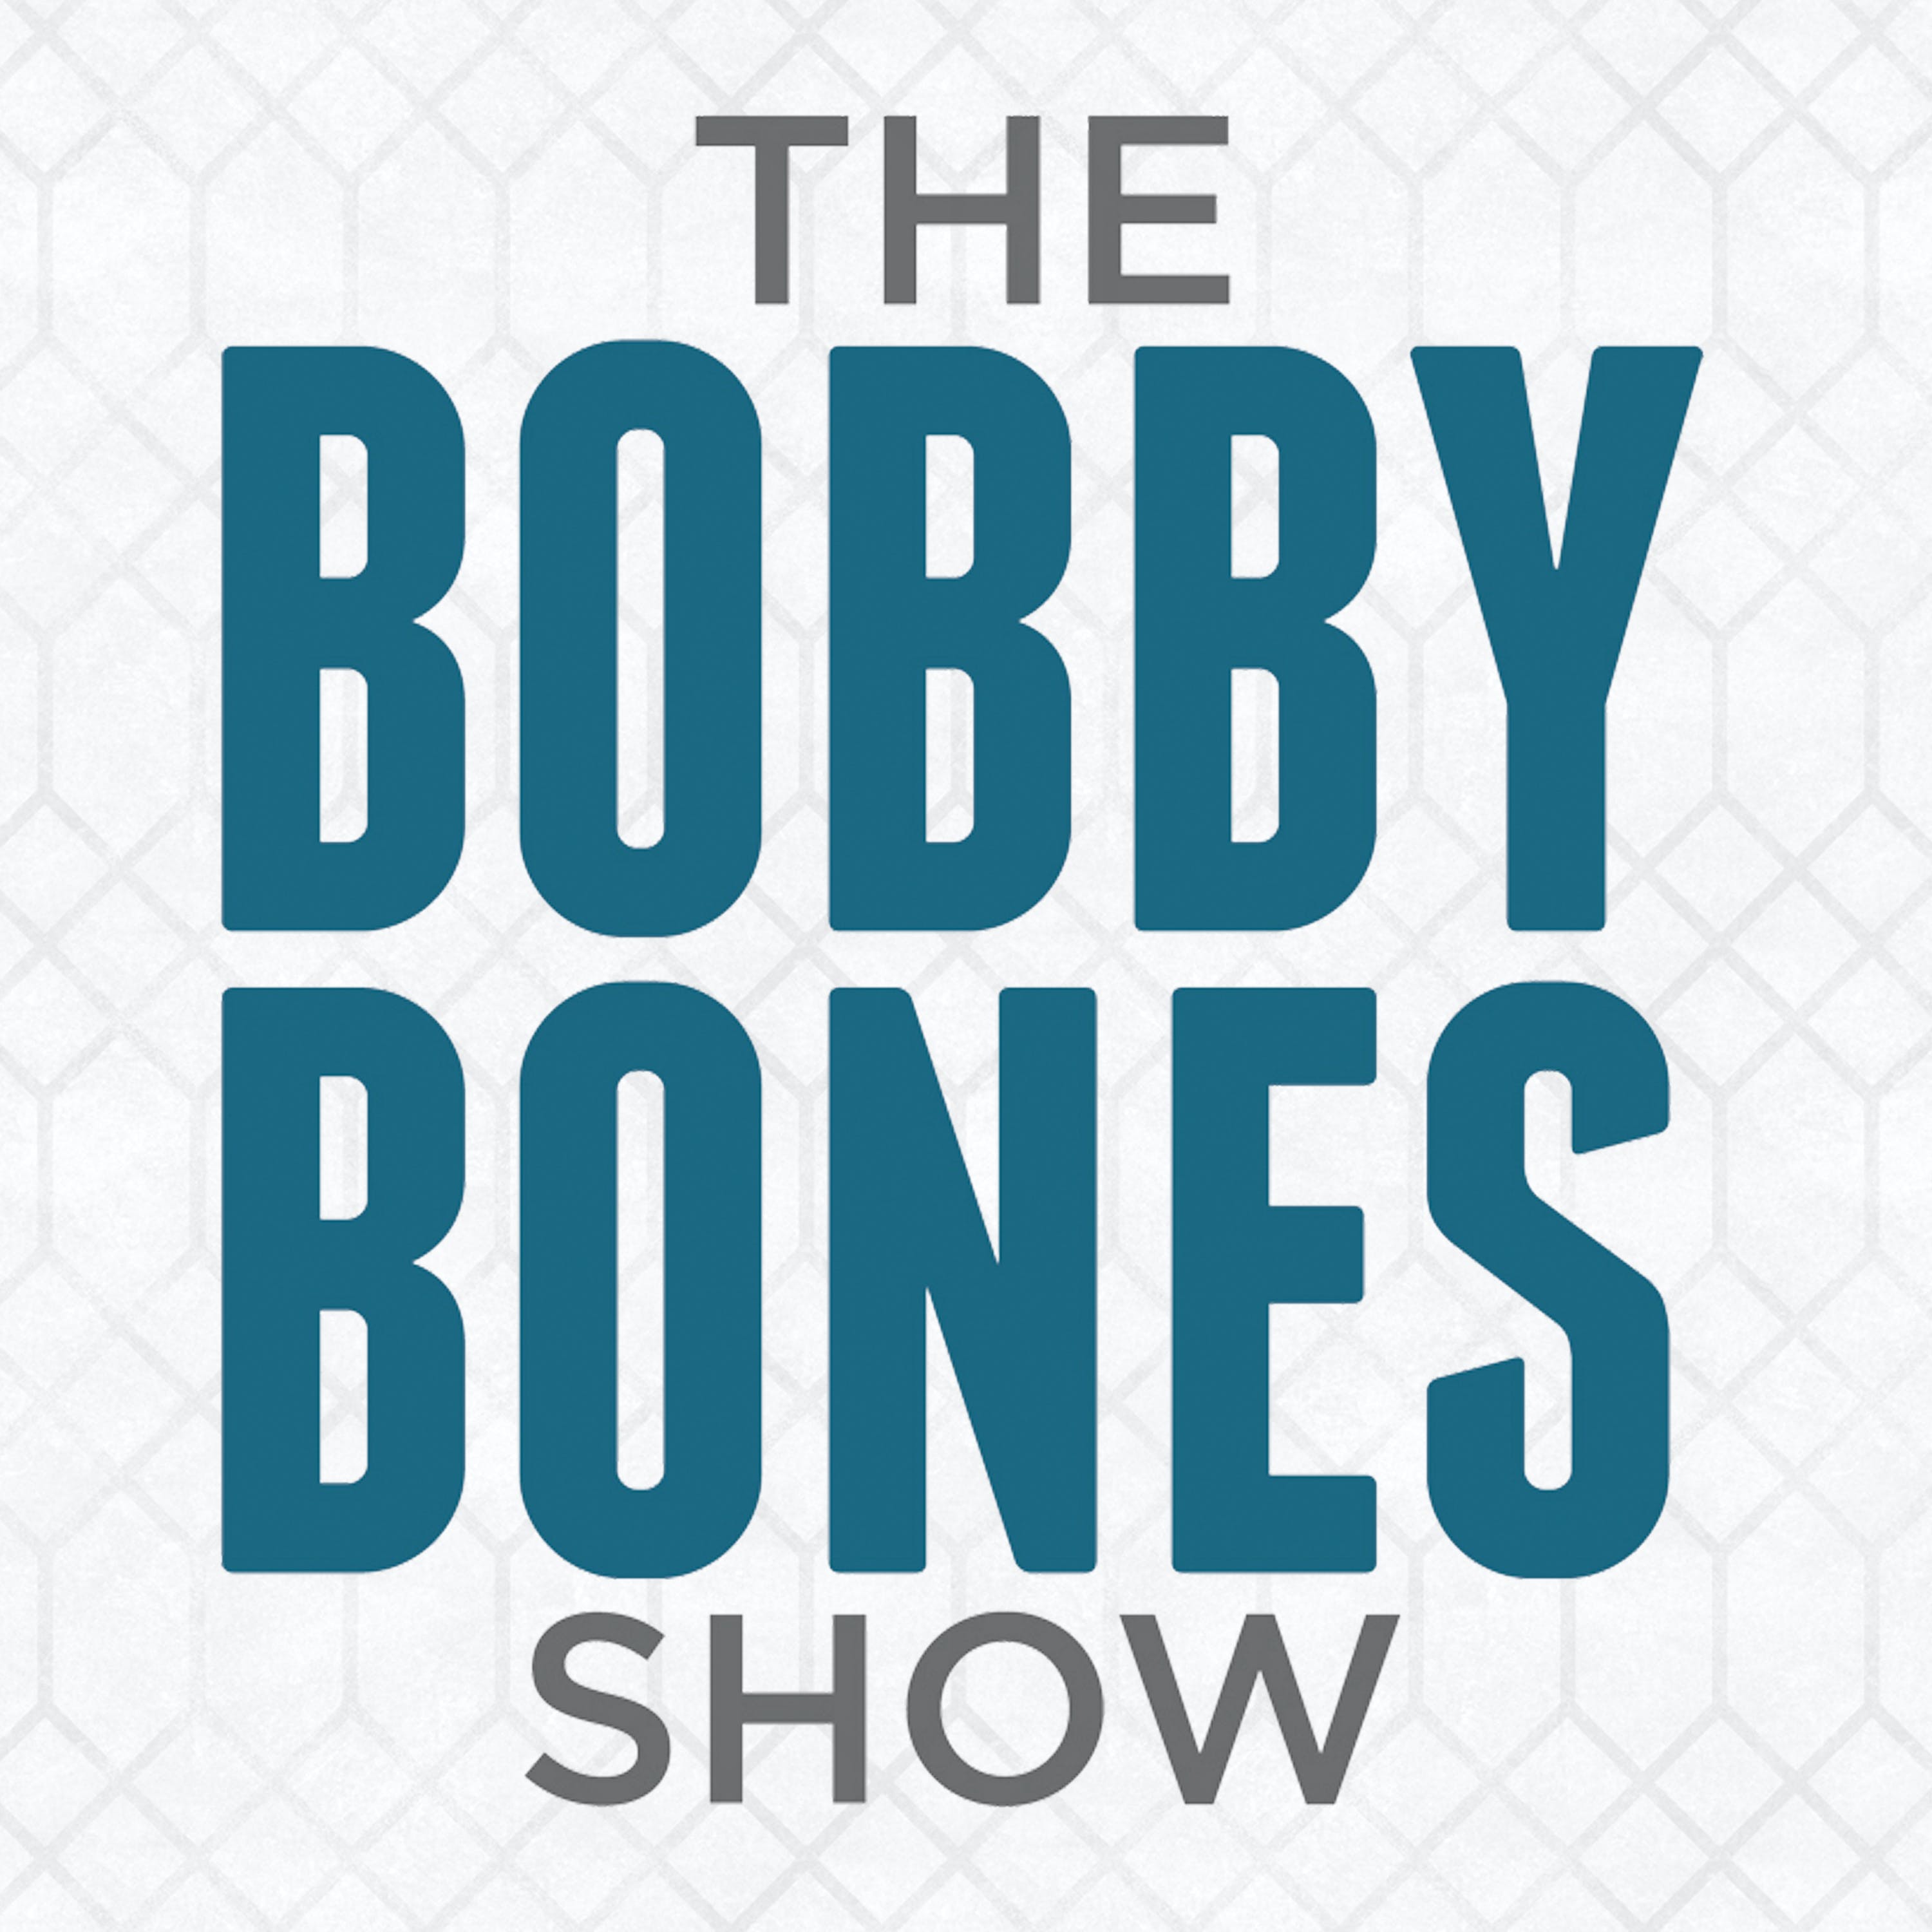 BONUS: BobbyCast -#189 - Thomas Rhett talks about having another baby, Growing up with a Famous Dad and what it was like to play SNL